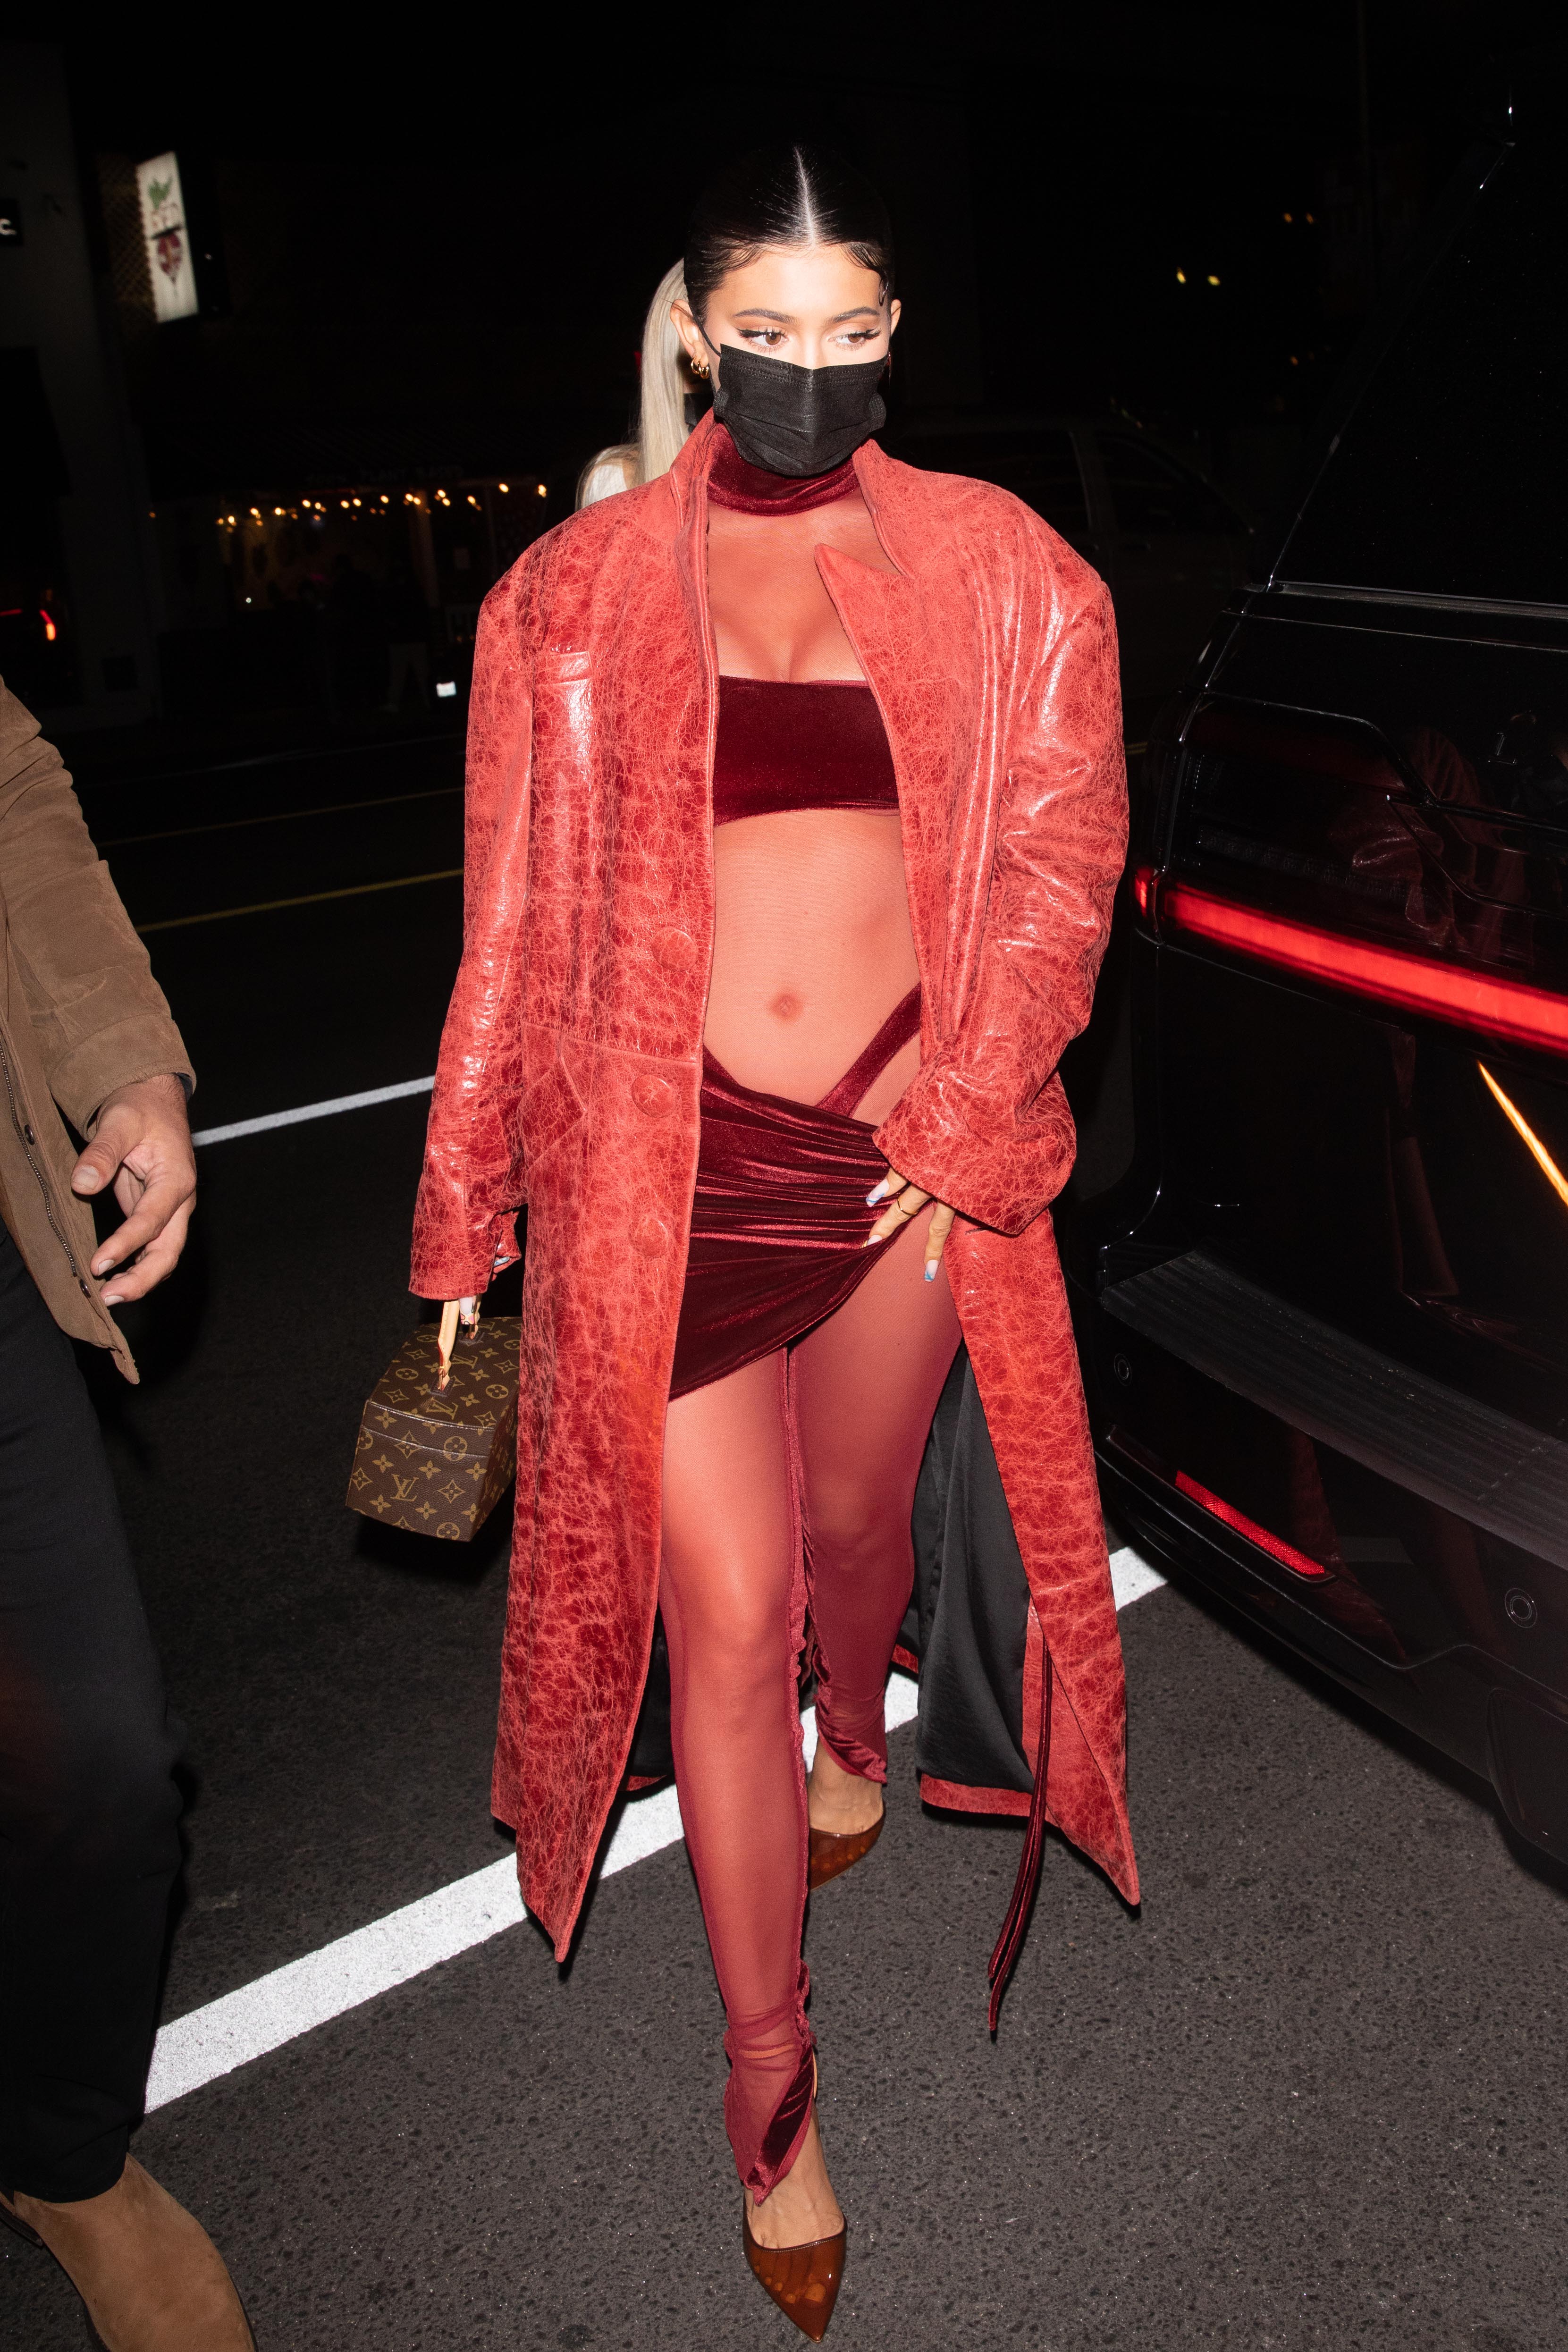 Kylie Jenner seen arriving at The Nice Guy in burgundy ensemble